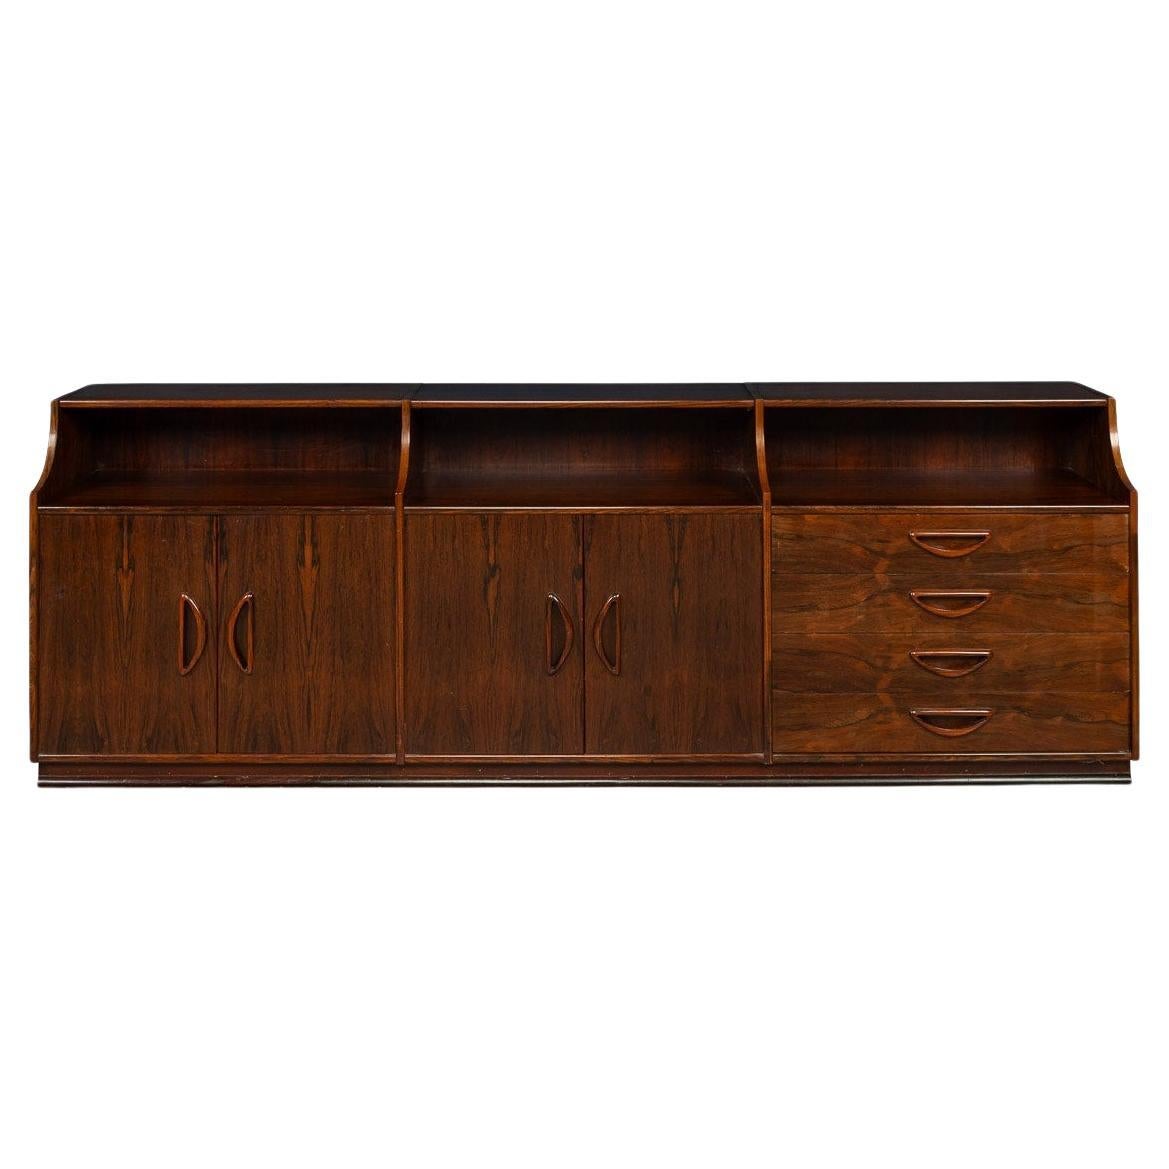 20th Century Italian Rosewood Sideboard, c.1960s For Sale